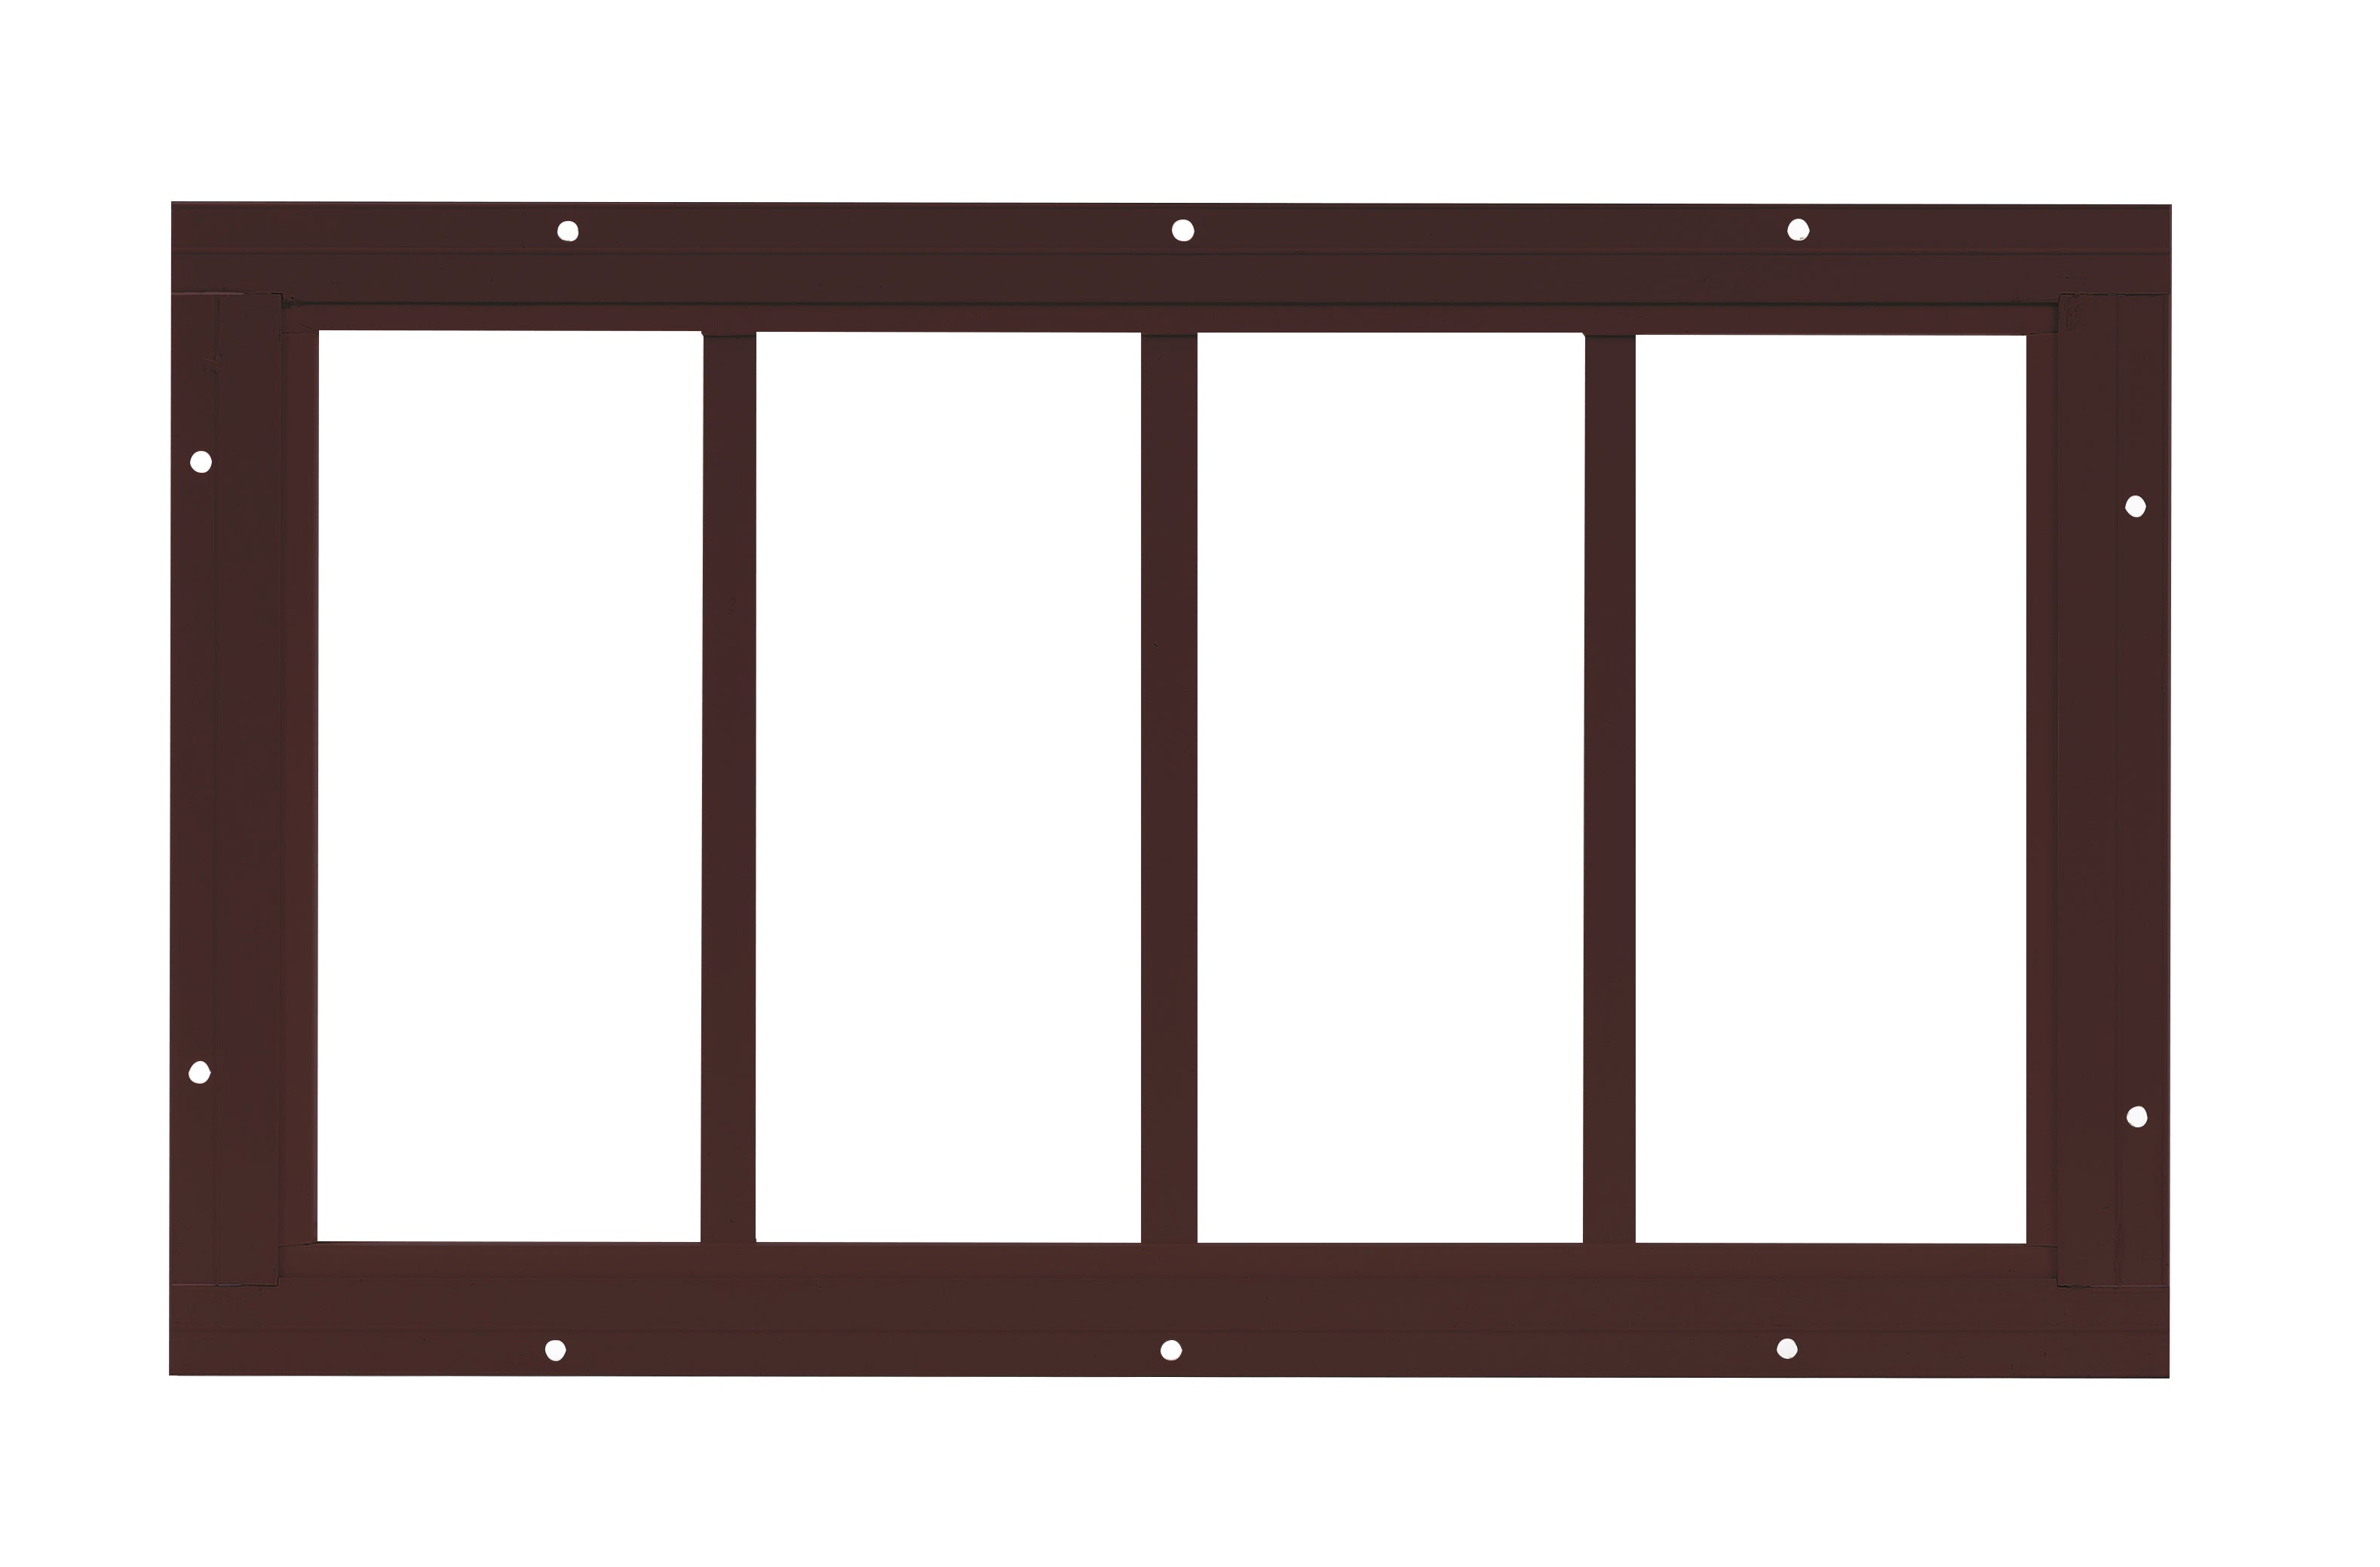 10.185" X 24" Transom Flush Mount Brown Window for Sheds, Playhouses, and MORE